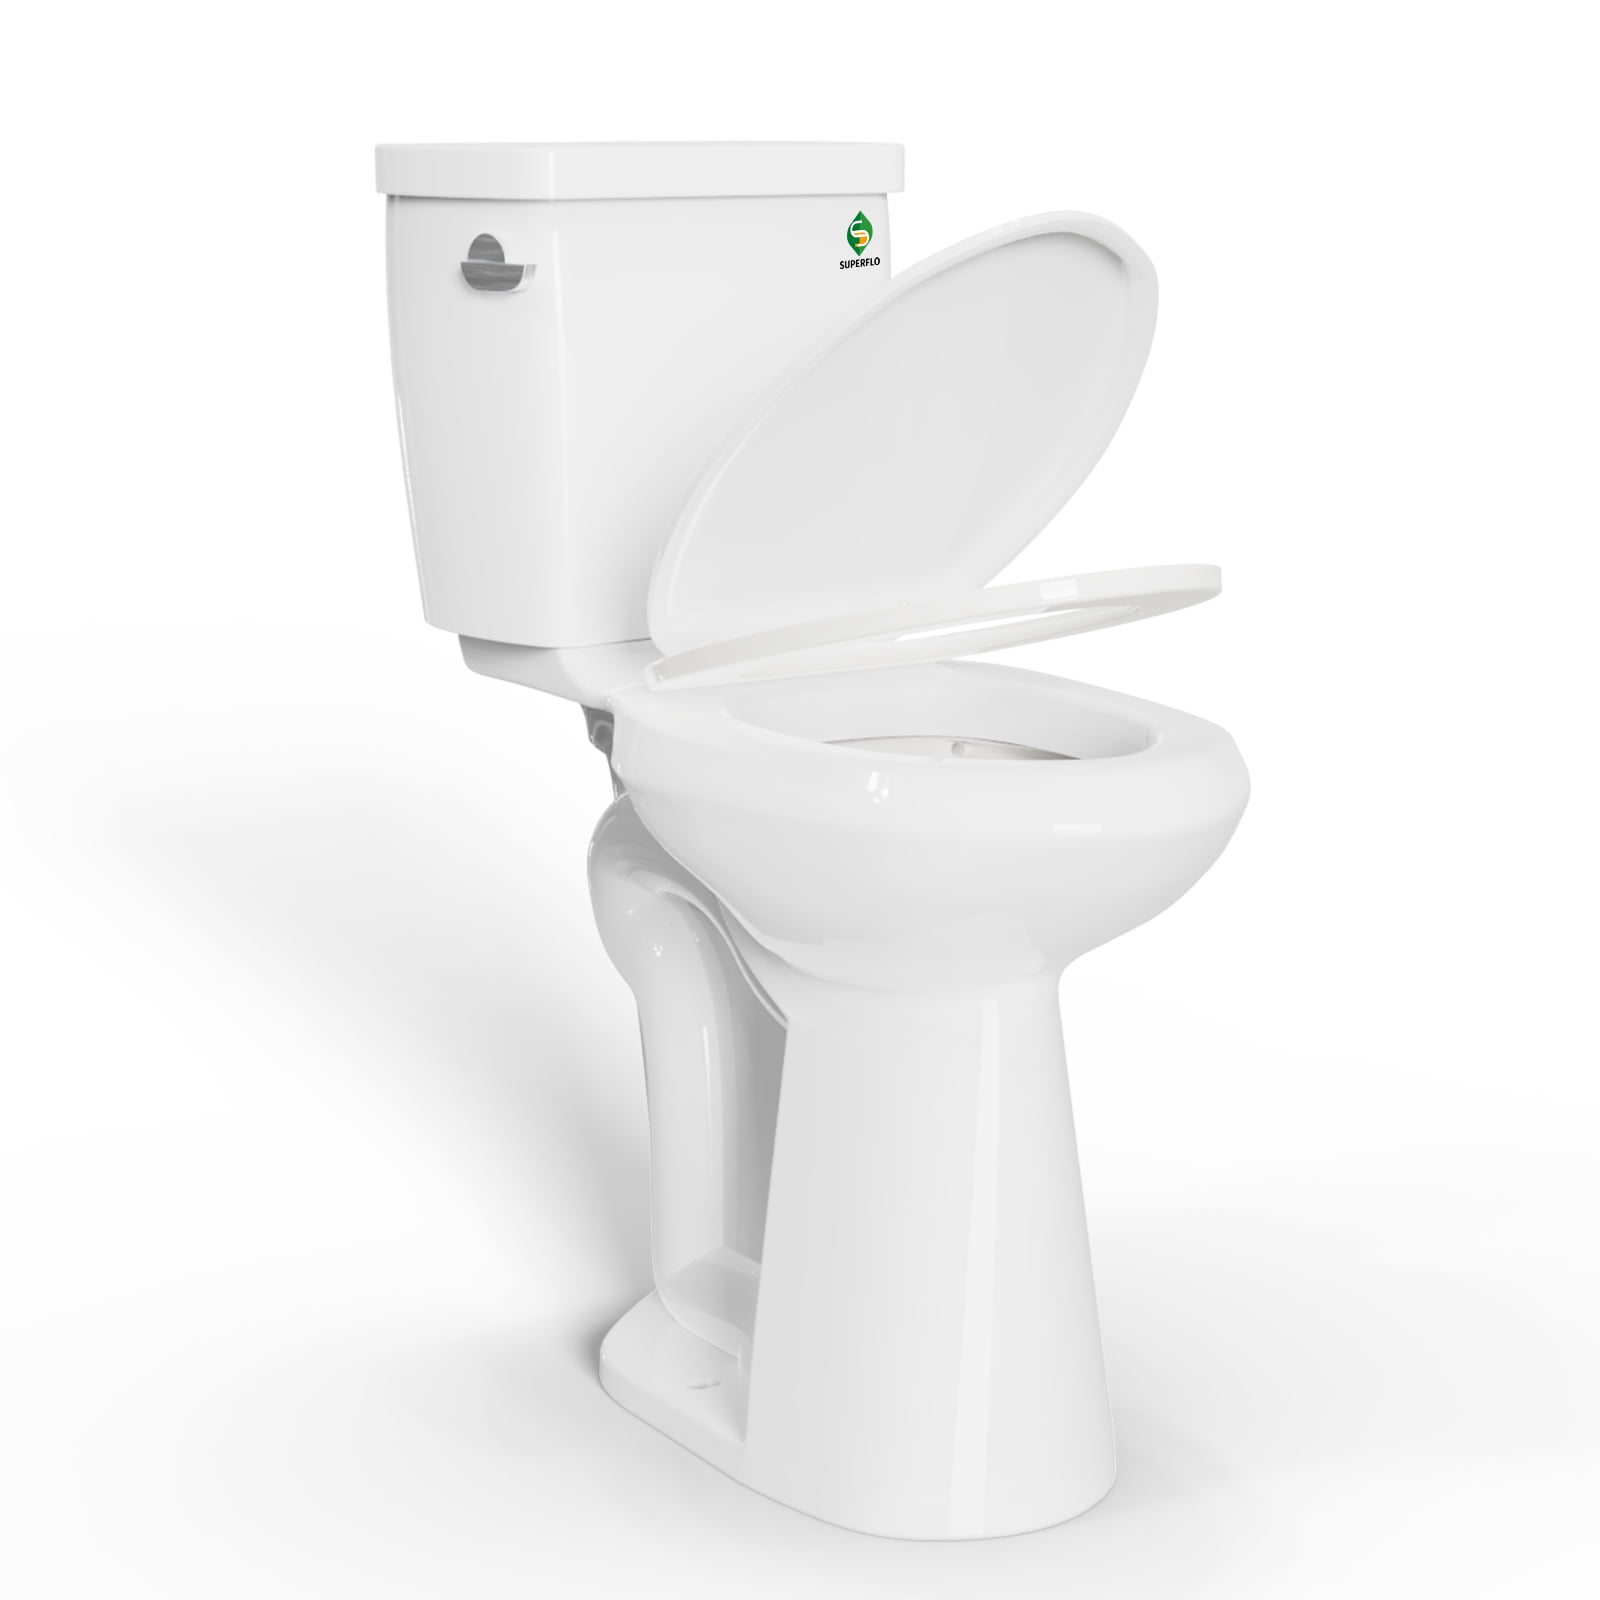 SUPERFLO Tall Toilet - 21 Inch Elongated Two Piece Extra Tall